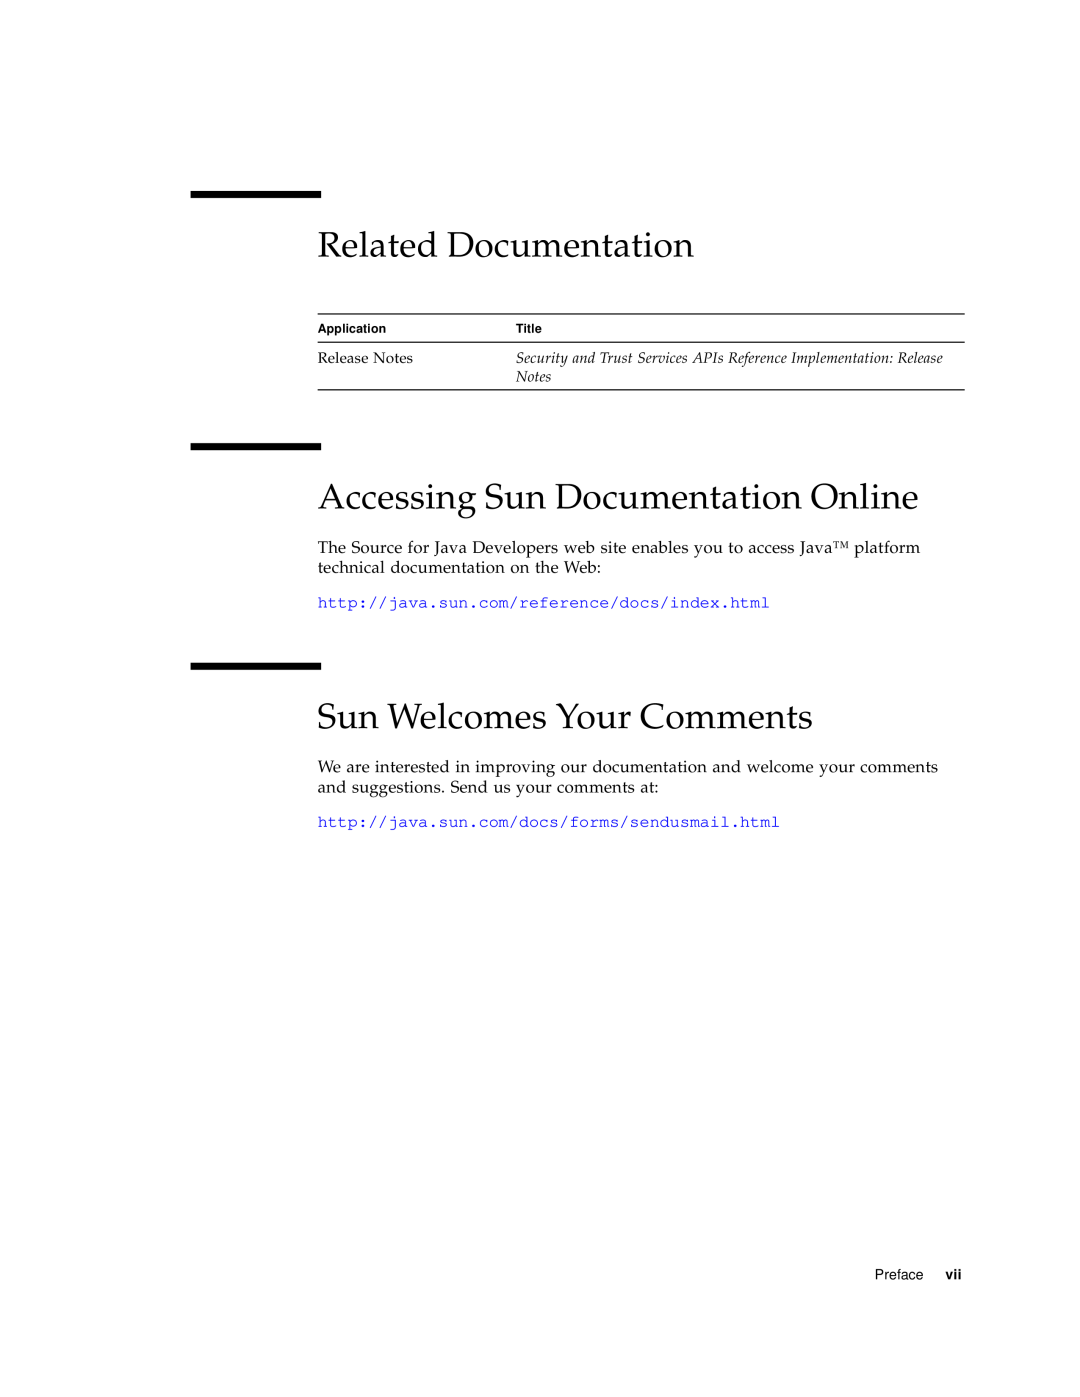 Sun Microsystems 1 manual Related Documentation, Accessing Sun Documentation Online, Sun Welcomes Your Comments 